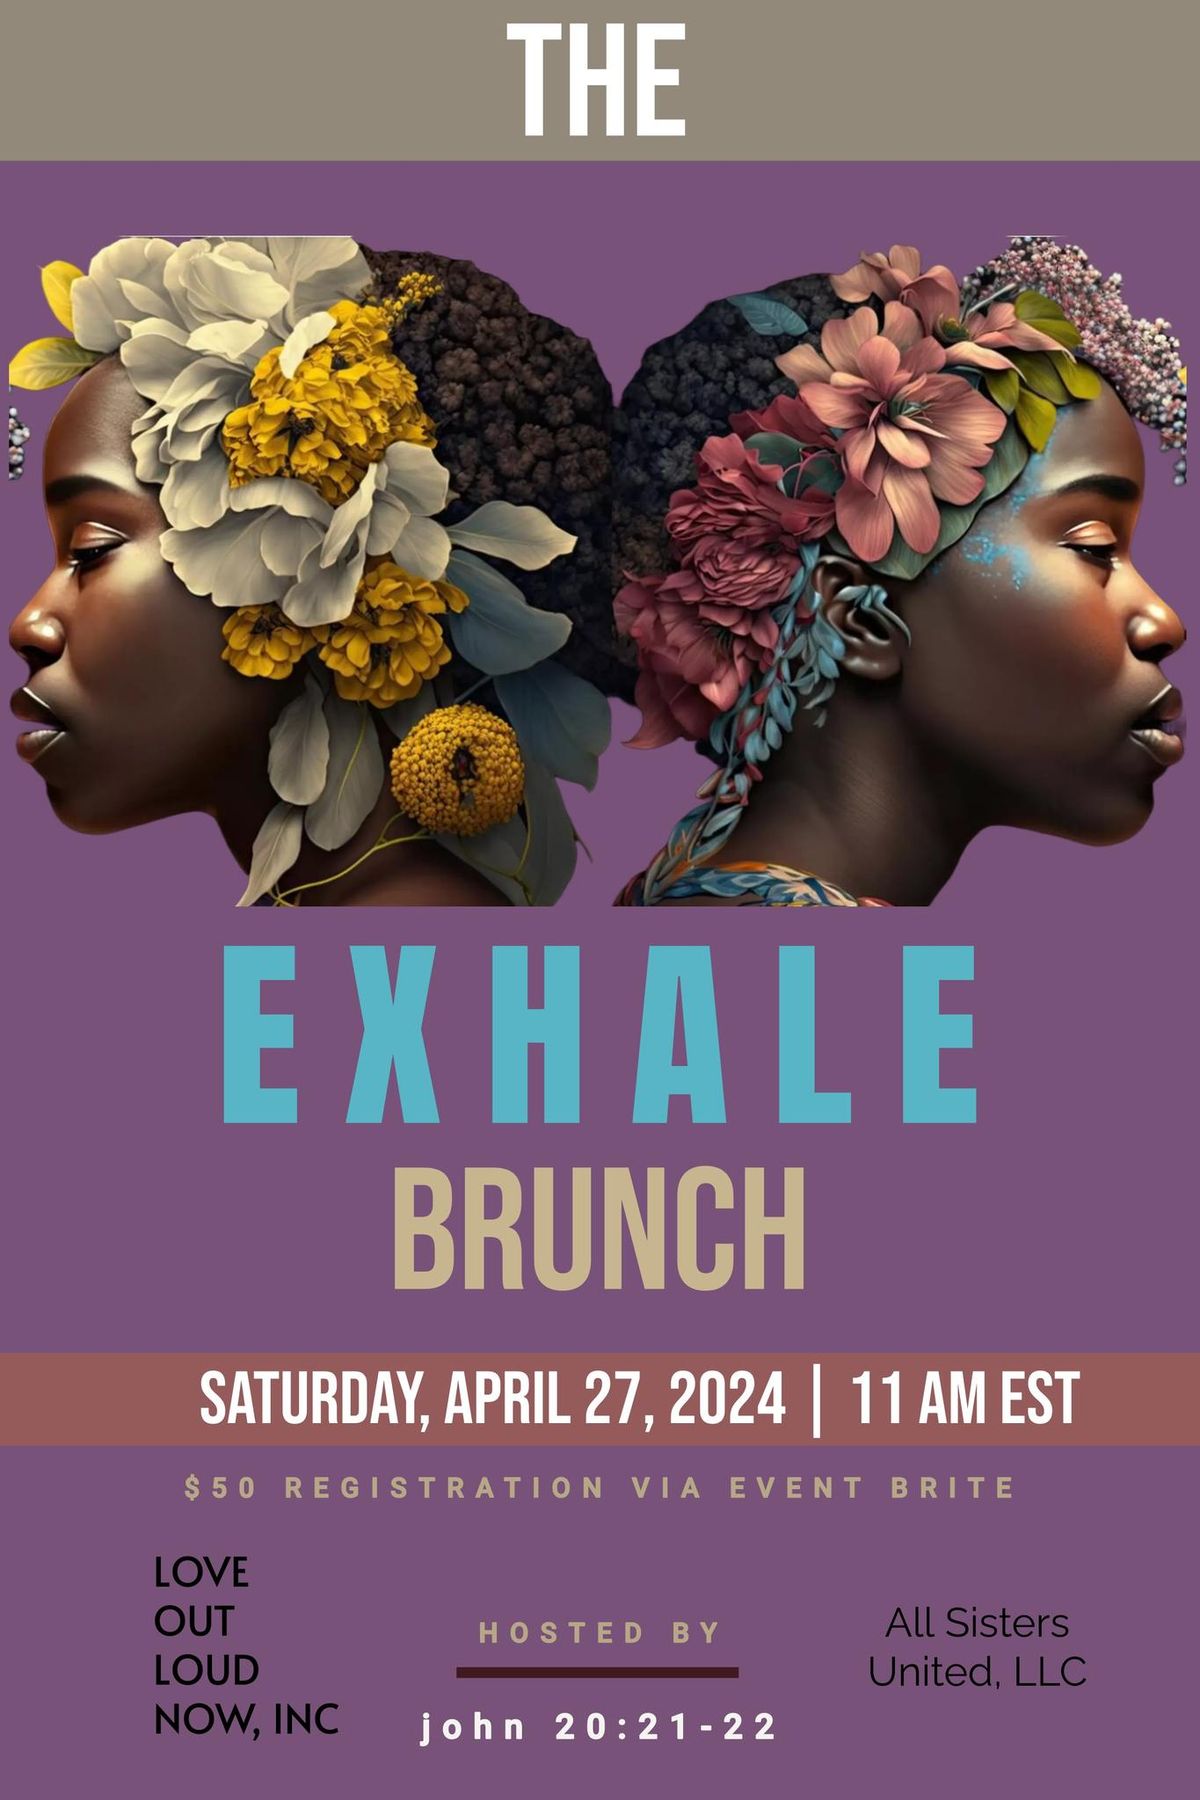 The Exhale Brunch